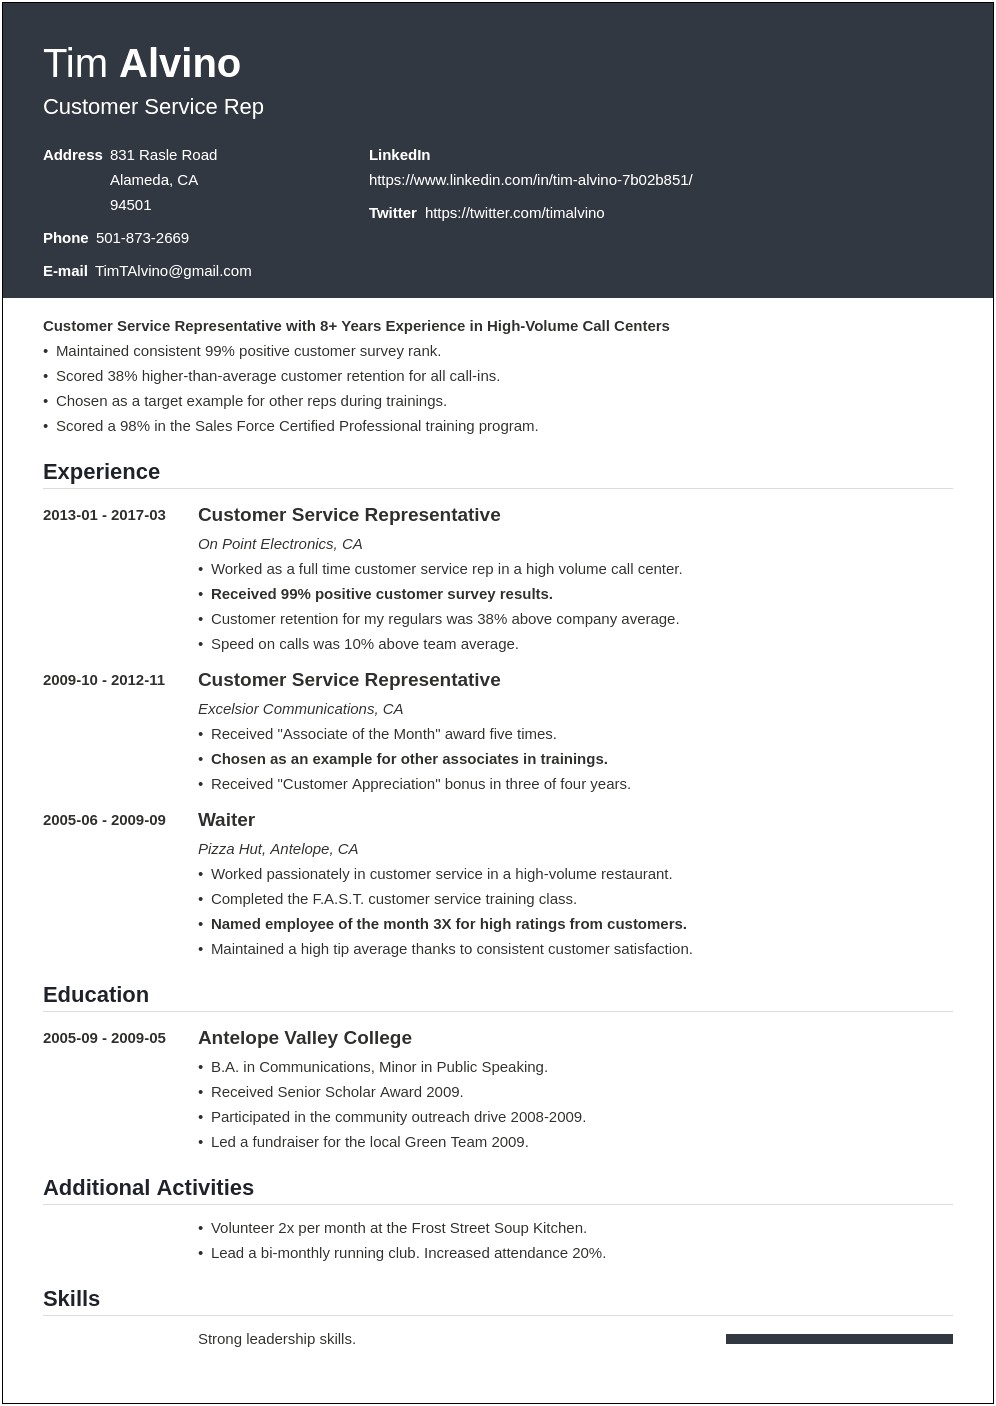 Resume Headline For 1 Year Experience